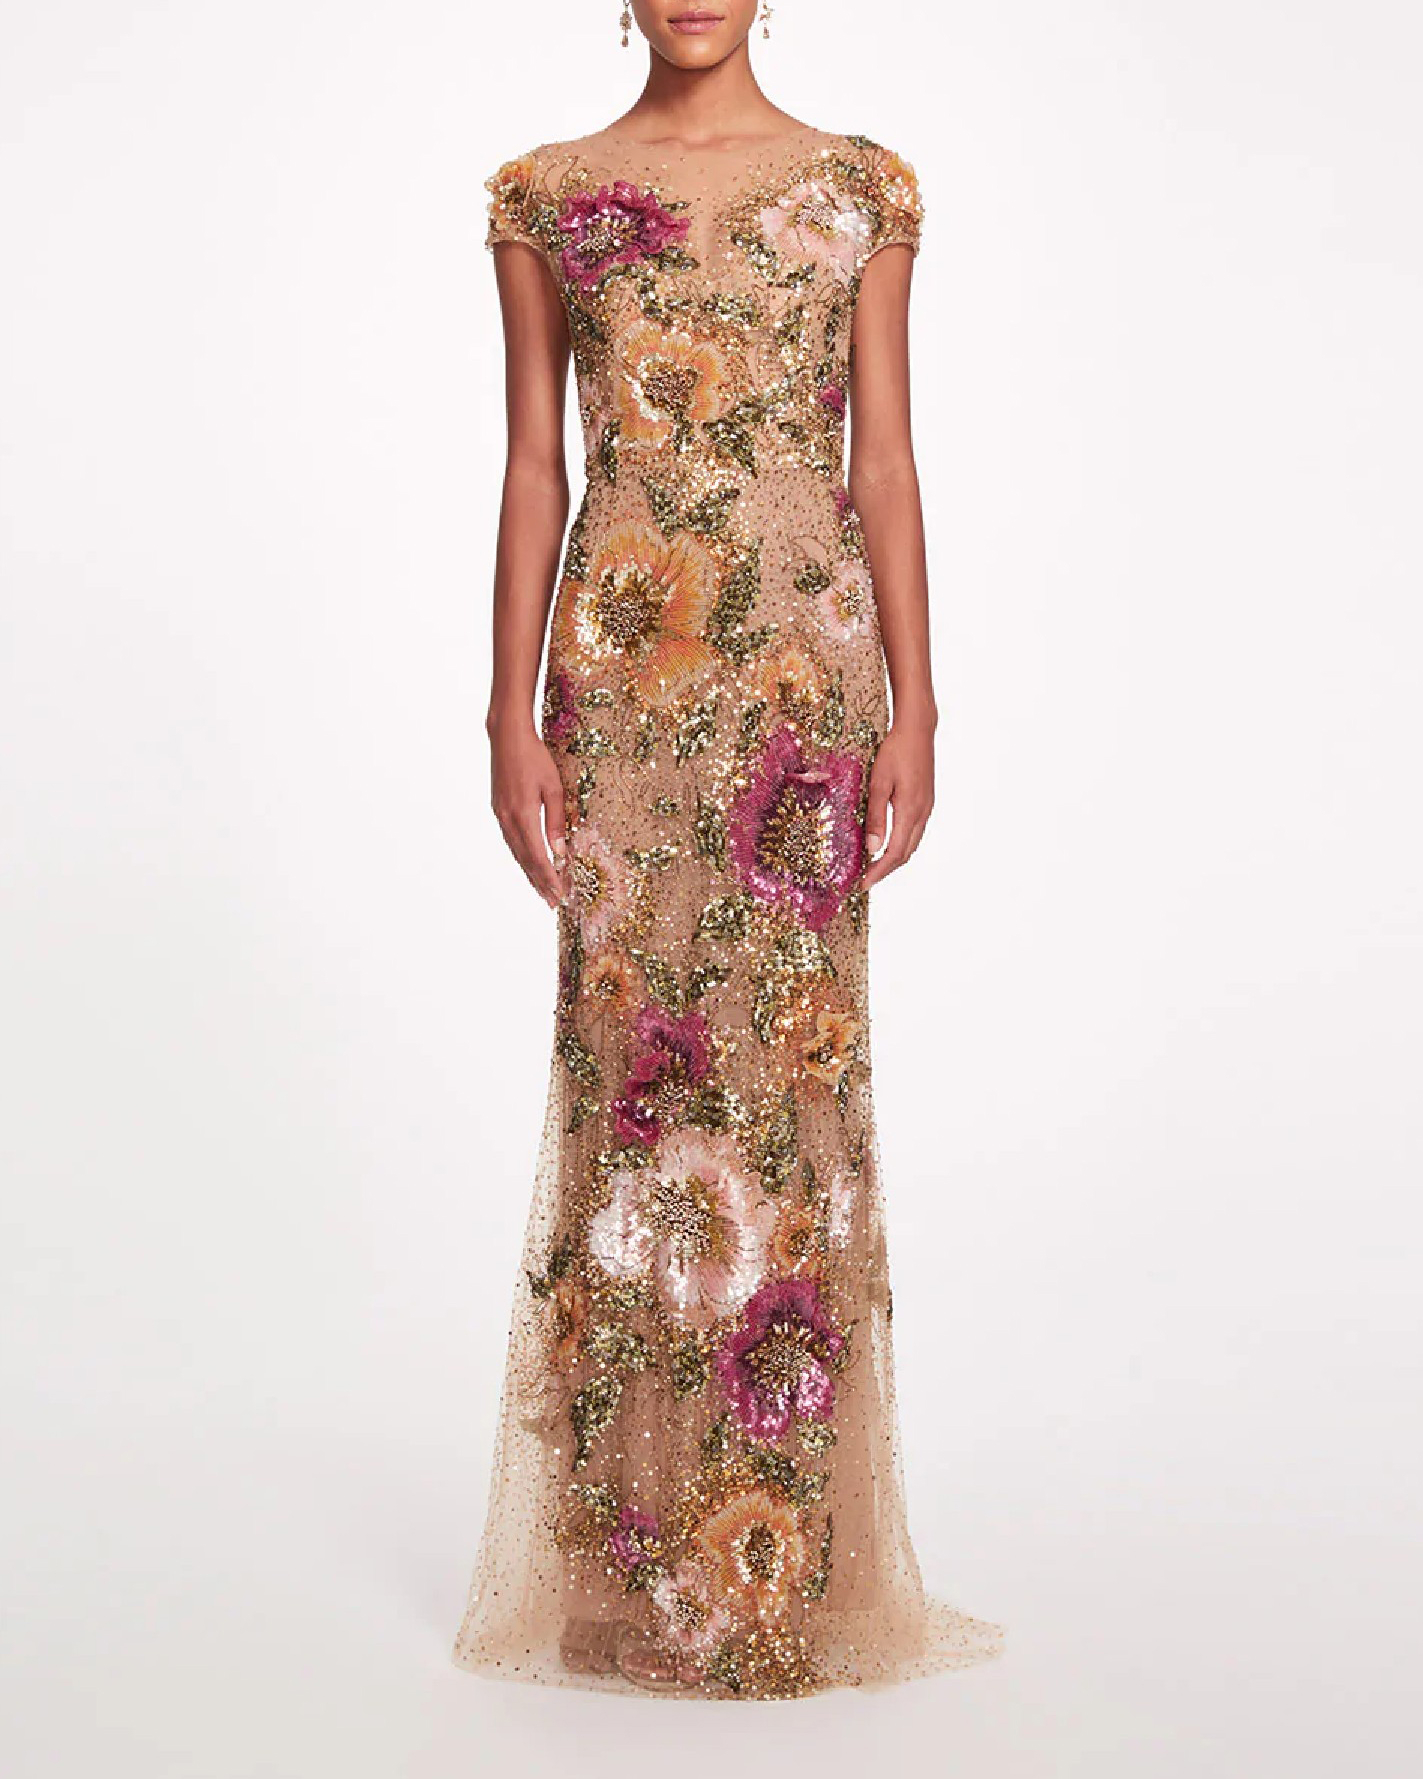 Bright Gold Mesh And Sequined Floral Embroidered Dress